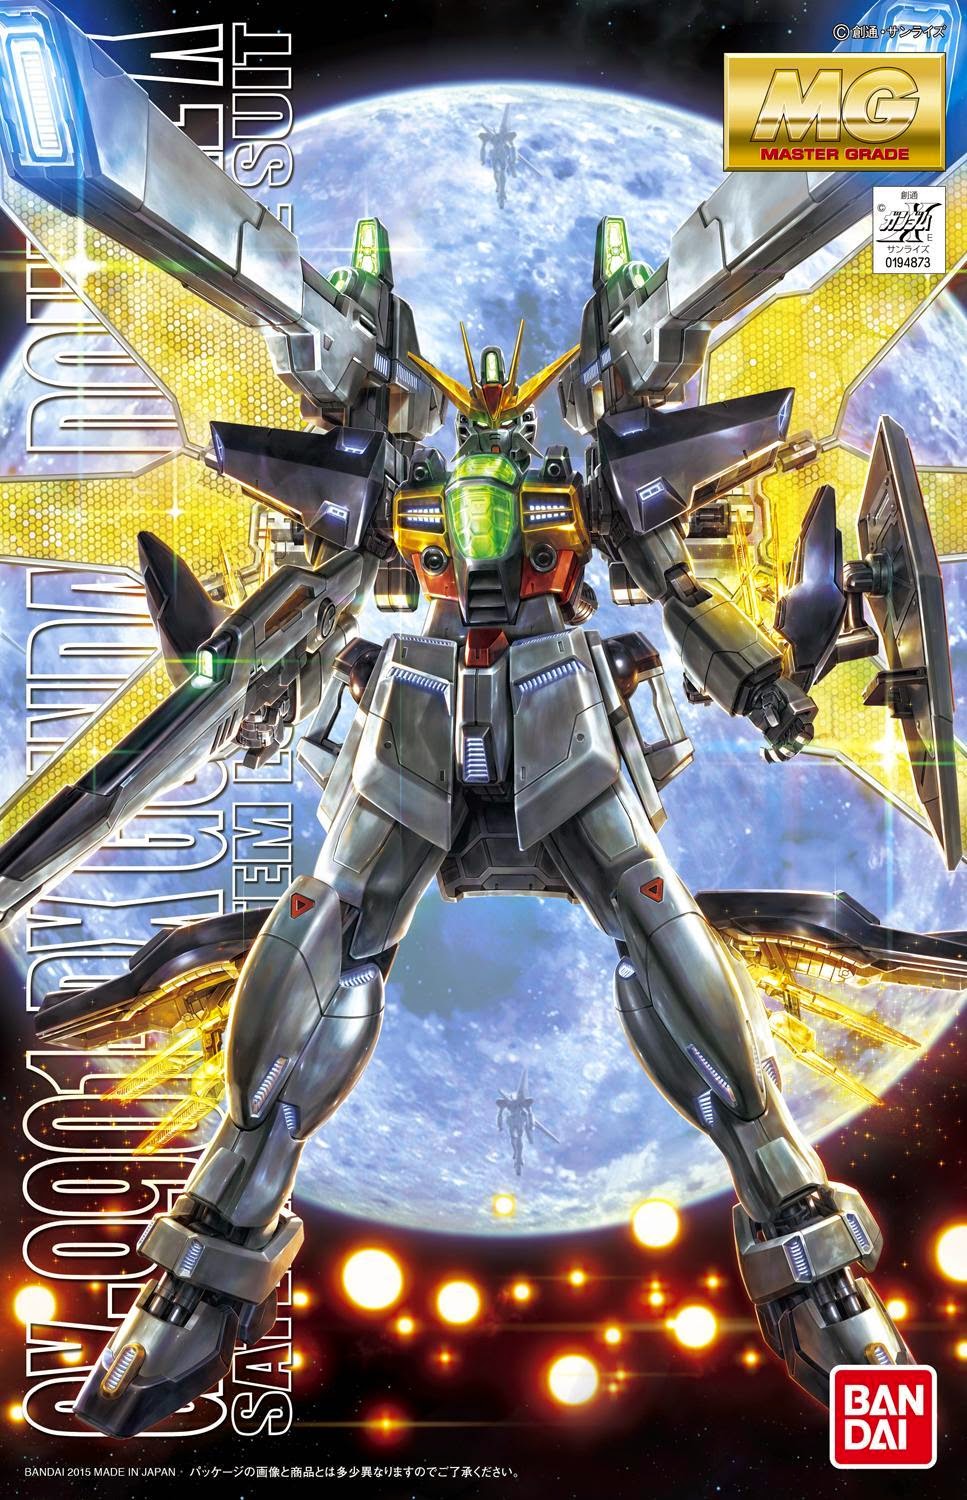 MG 1/100 Gundam Double X - Release Info, Box Art and Official Images